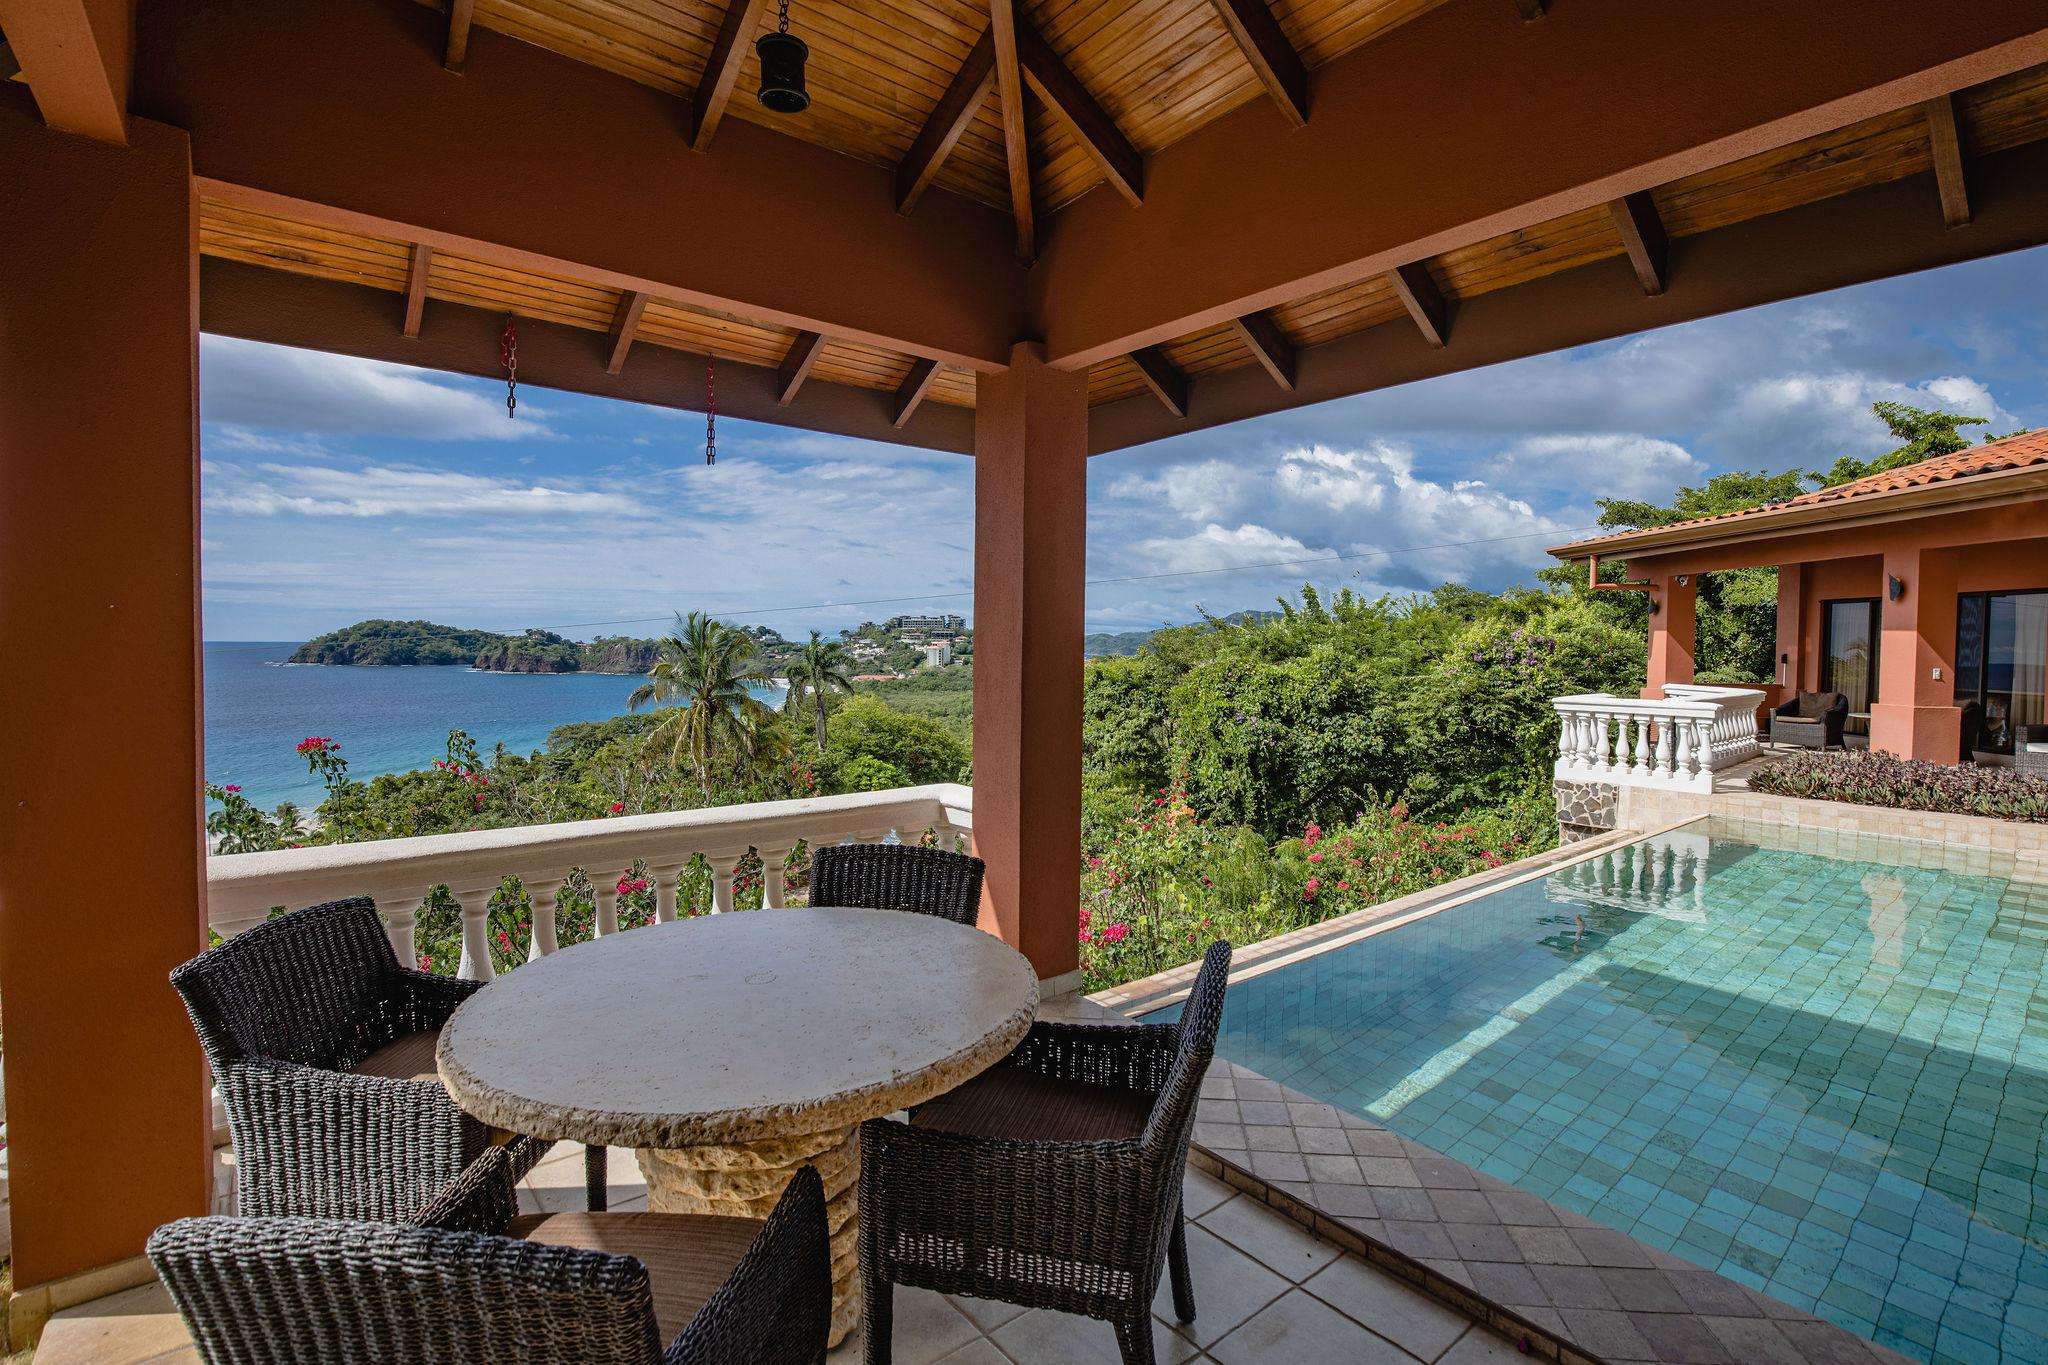 Casa Rosa pool and oceanview vacation rental Costa Rica